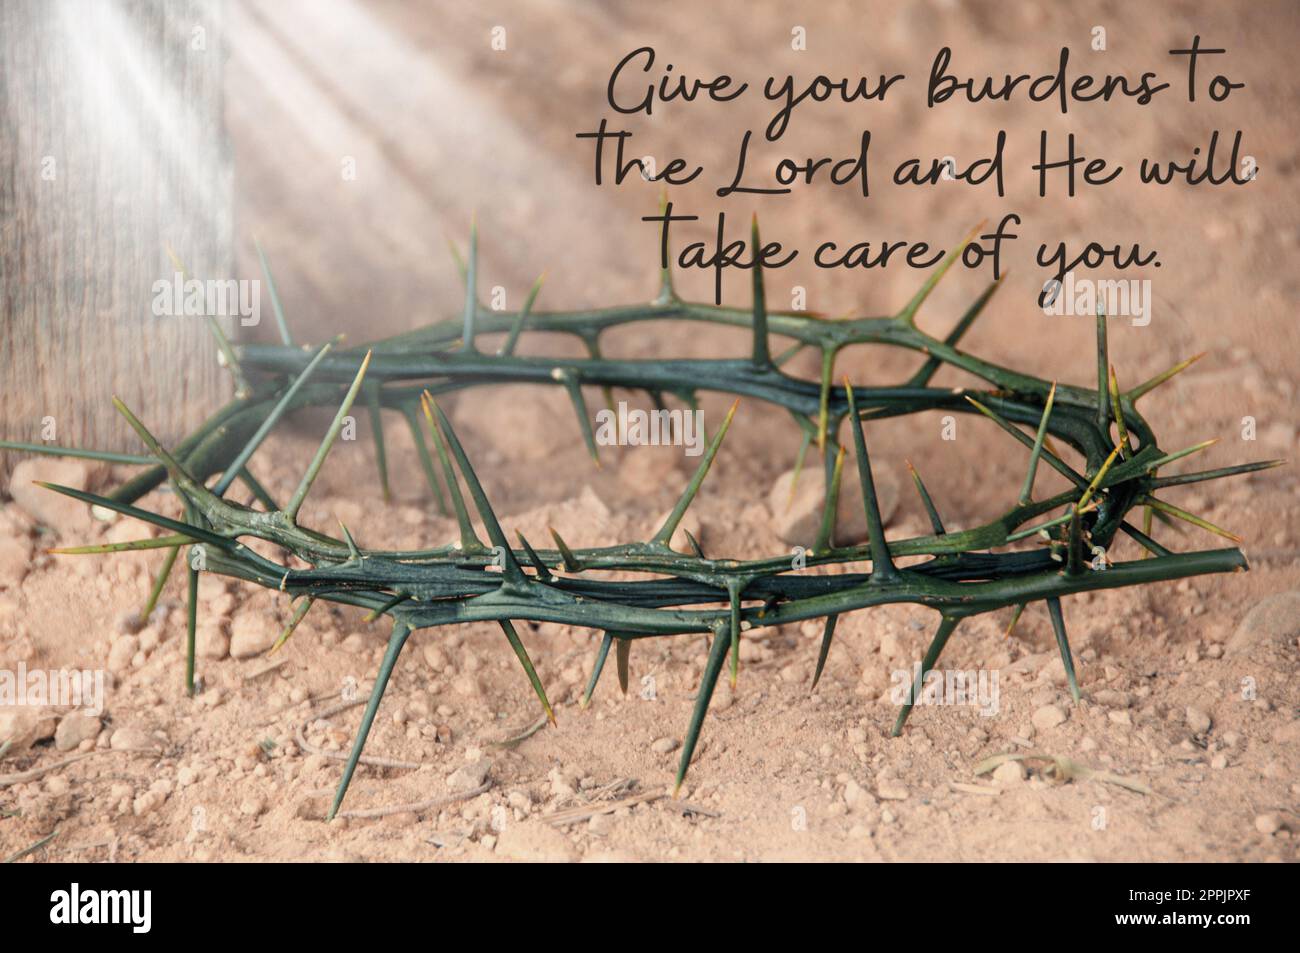 Bible verse quote - Give your burden to the Lord and he will take care of you. With shining Crown of thorns background. Stock Photo